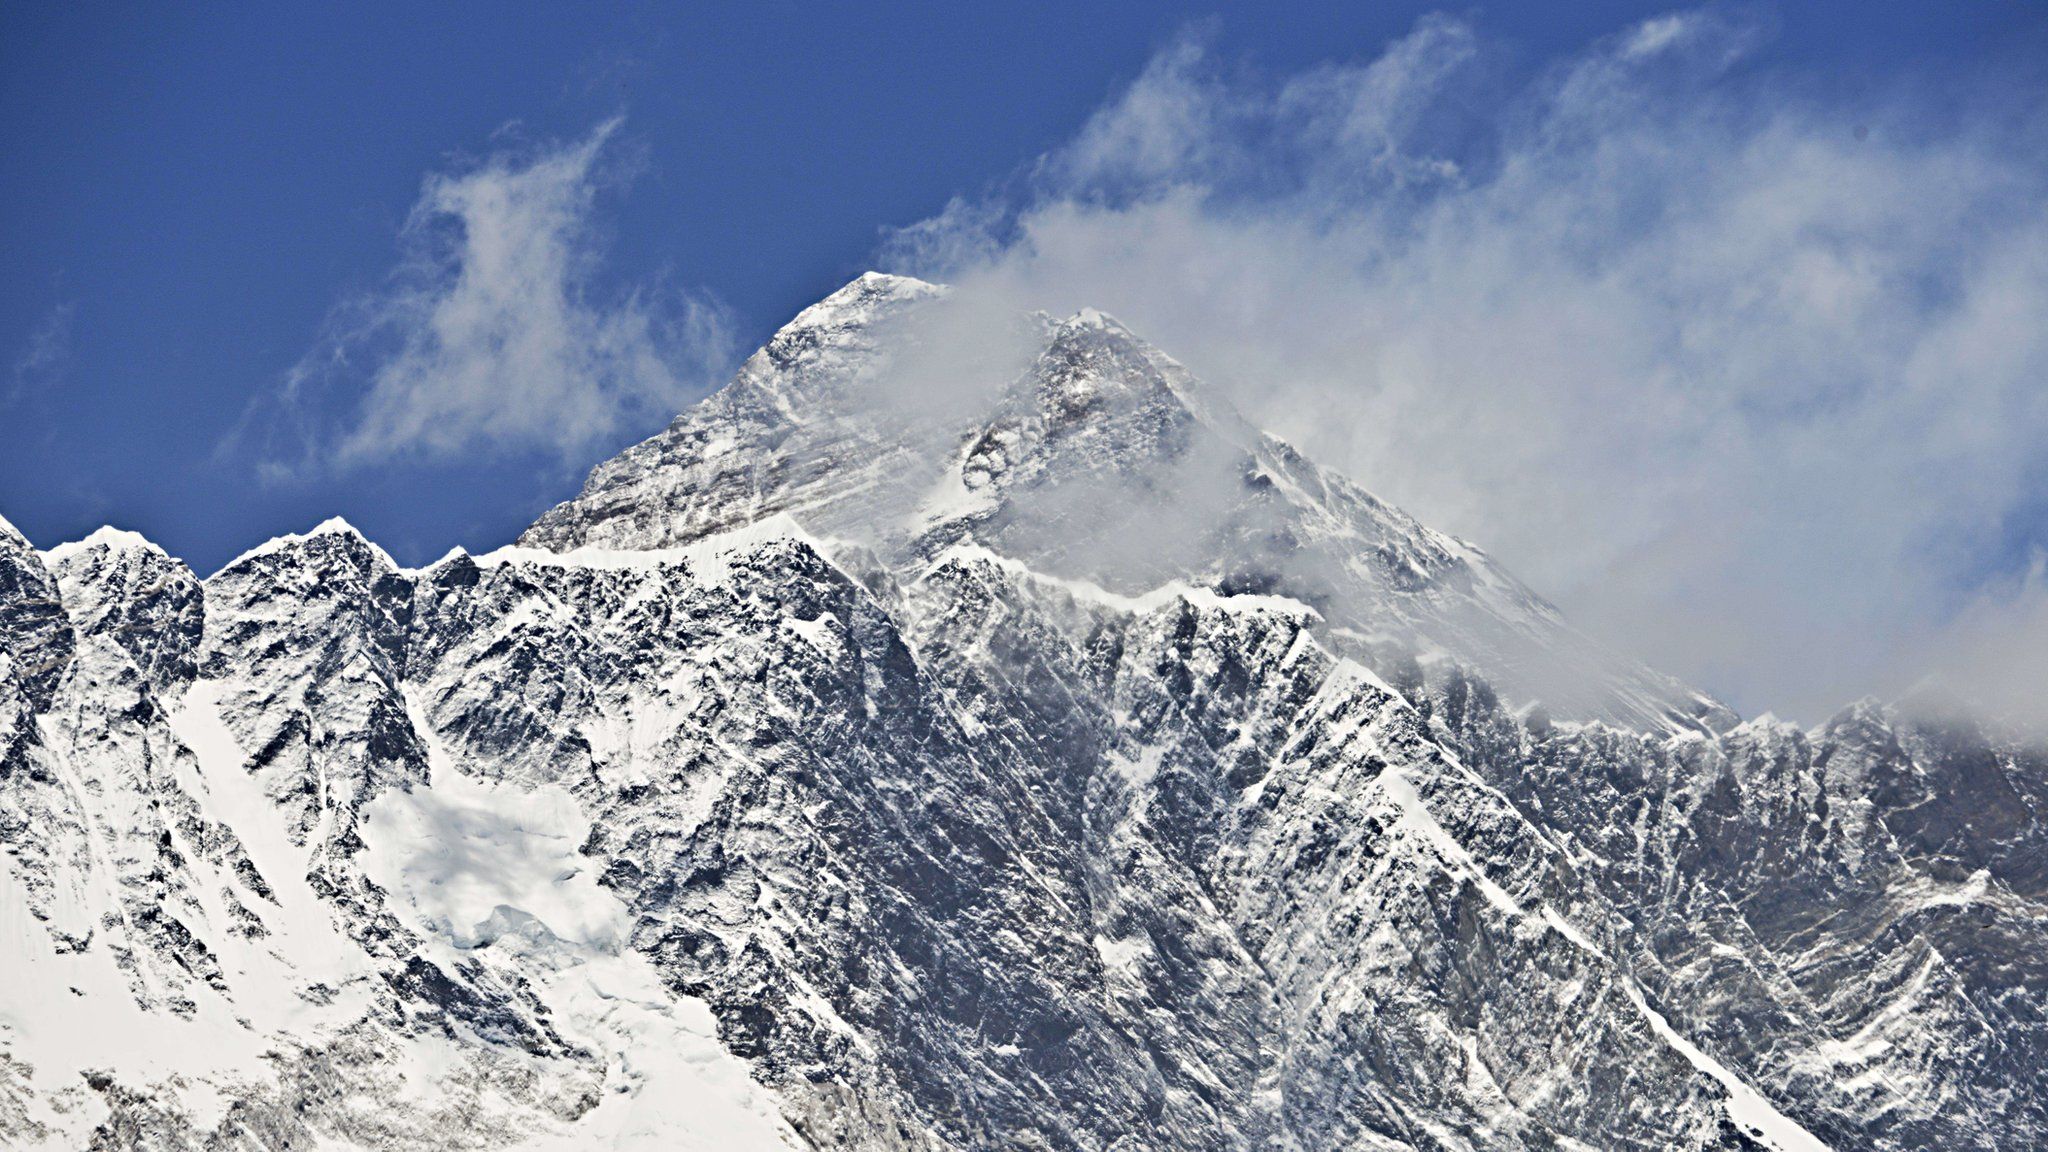 Everest, viewed from a distance, with clear skies